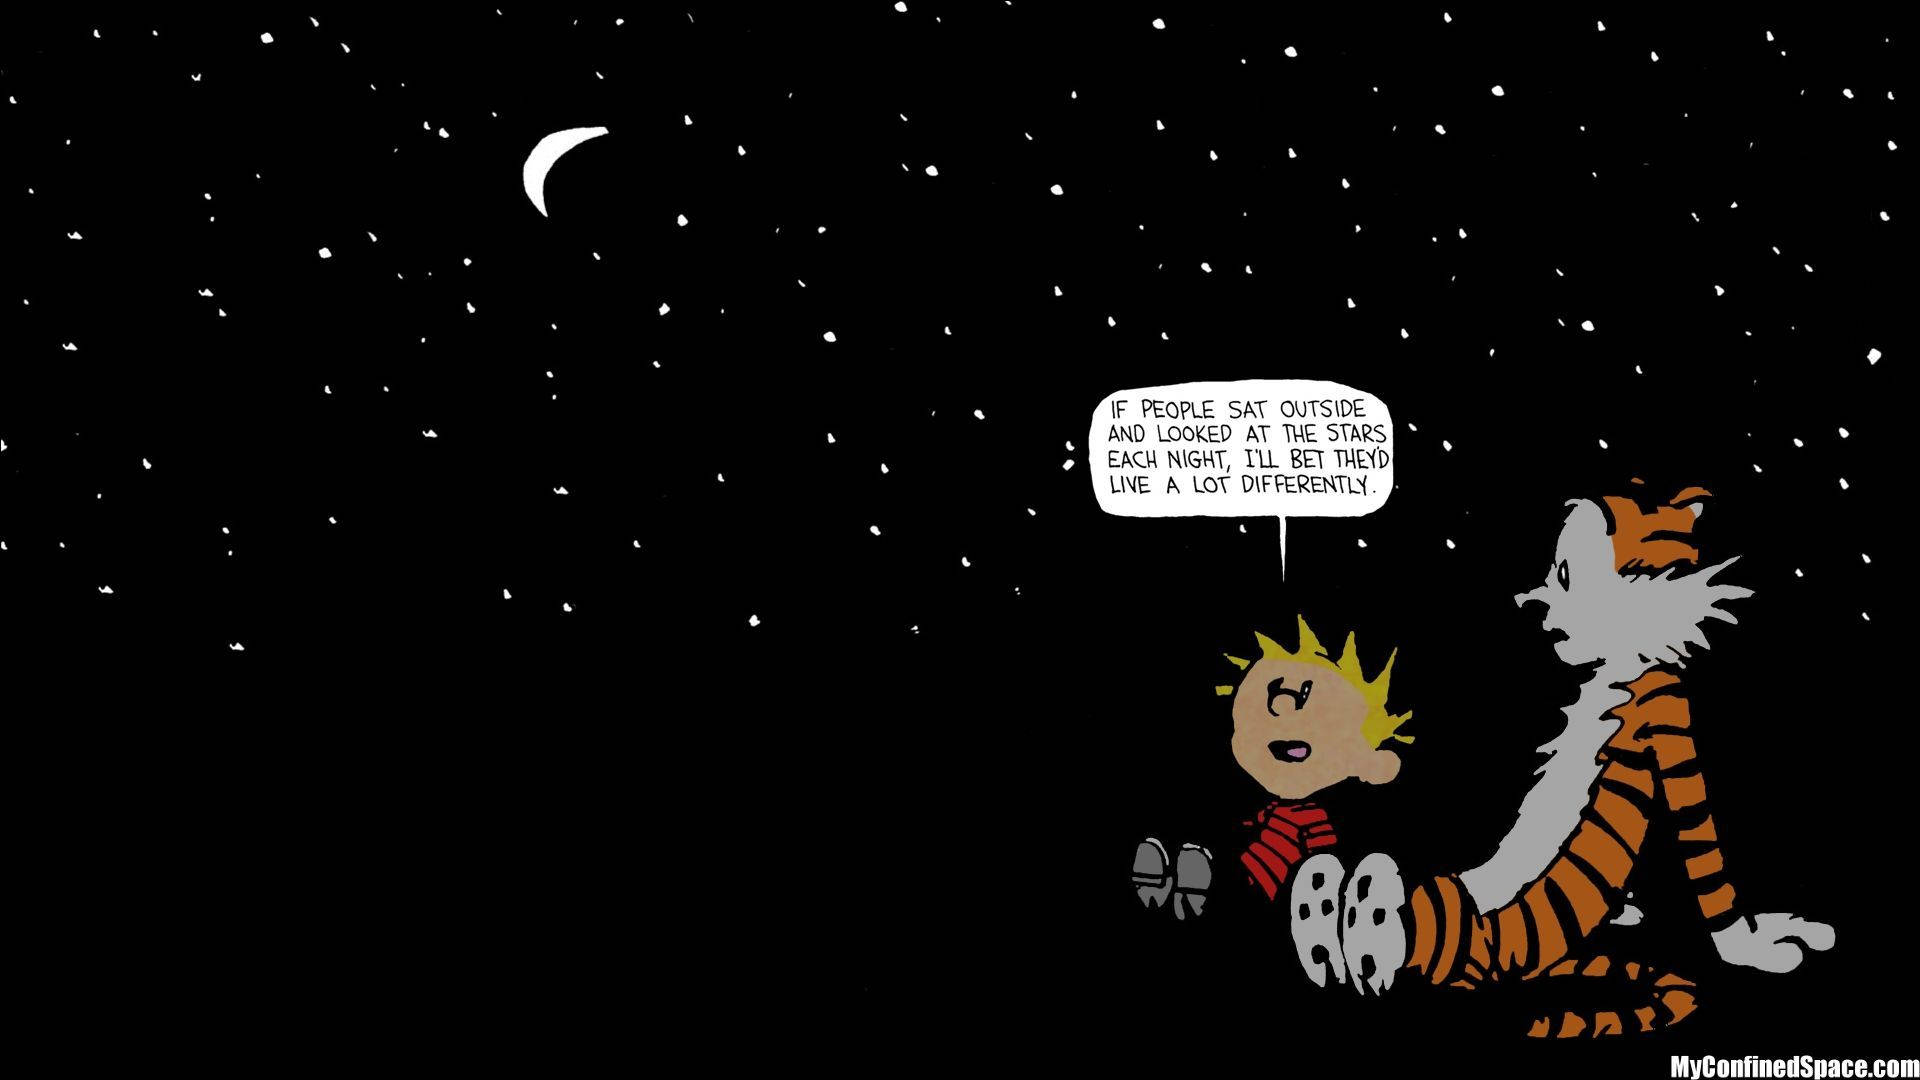 Free Calvin And Hobbes Wallpaper Downloads, [100+] Calvin And Hobbes  Wallpapers for FREE 